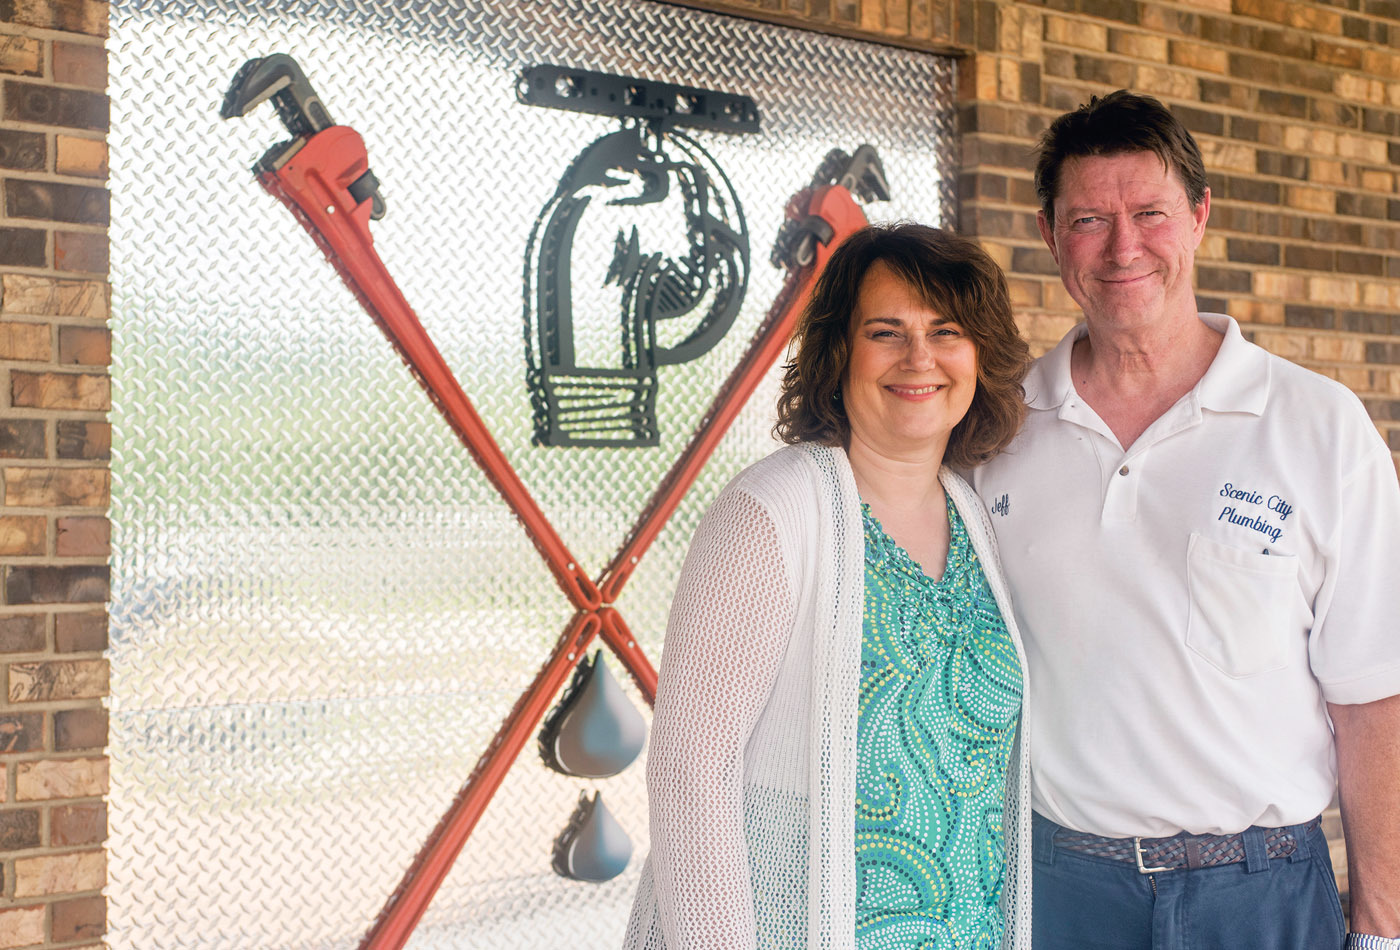 Jacqui and Jeff Logan, owners of Scenic City Plumbing in Hixson, Tennessee